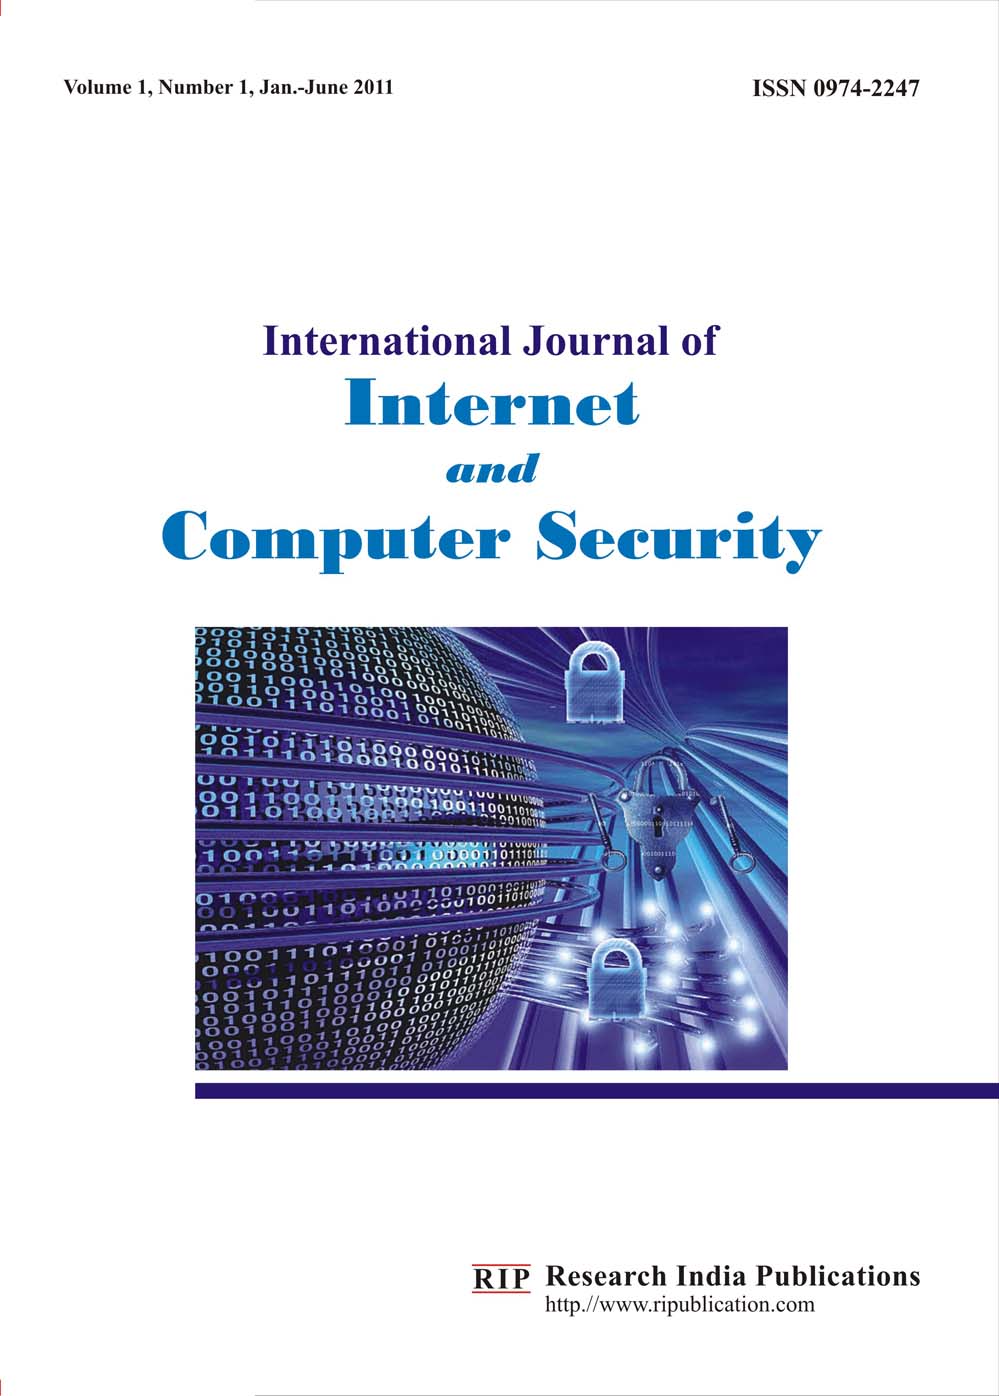 International Journal of Secure Internet and Computer Security